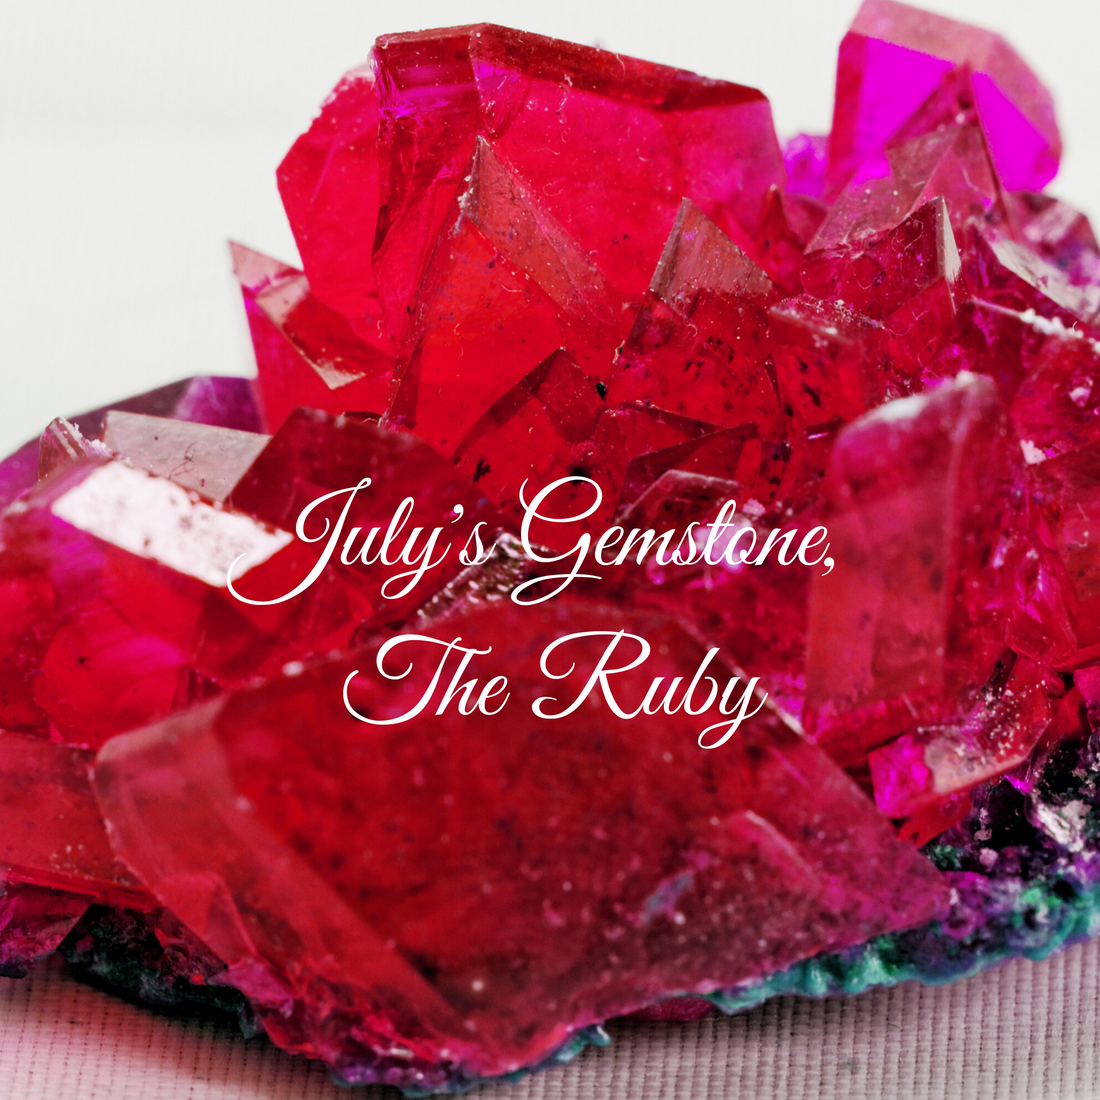 July's Gem, The Ruby